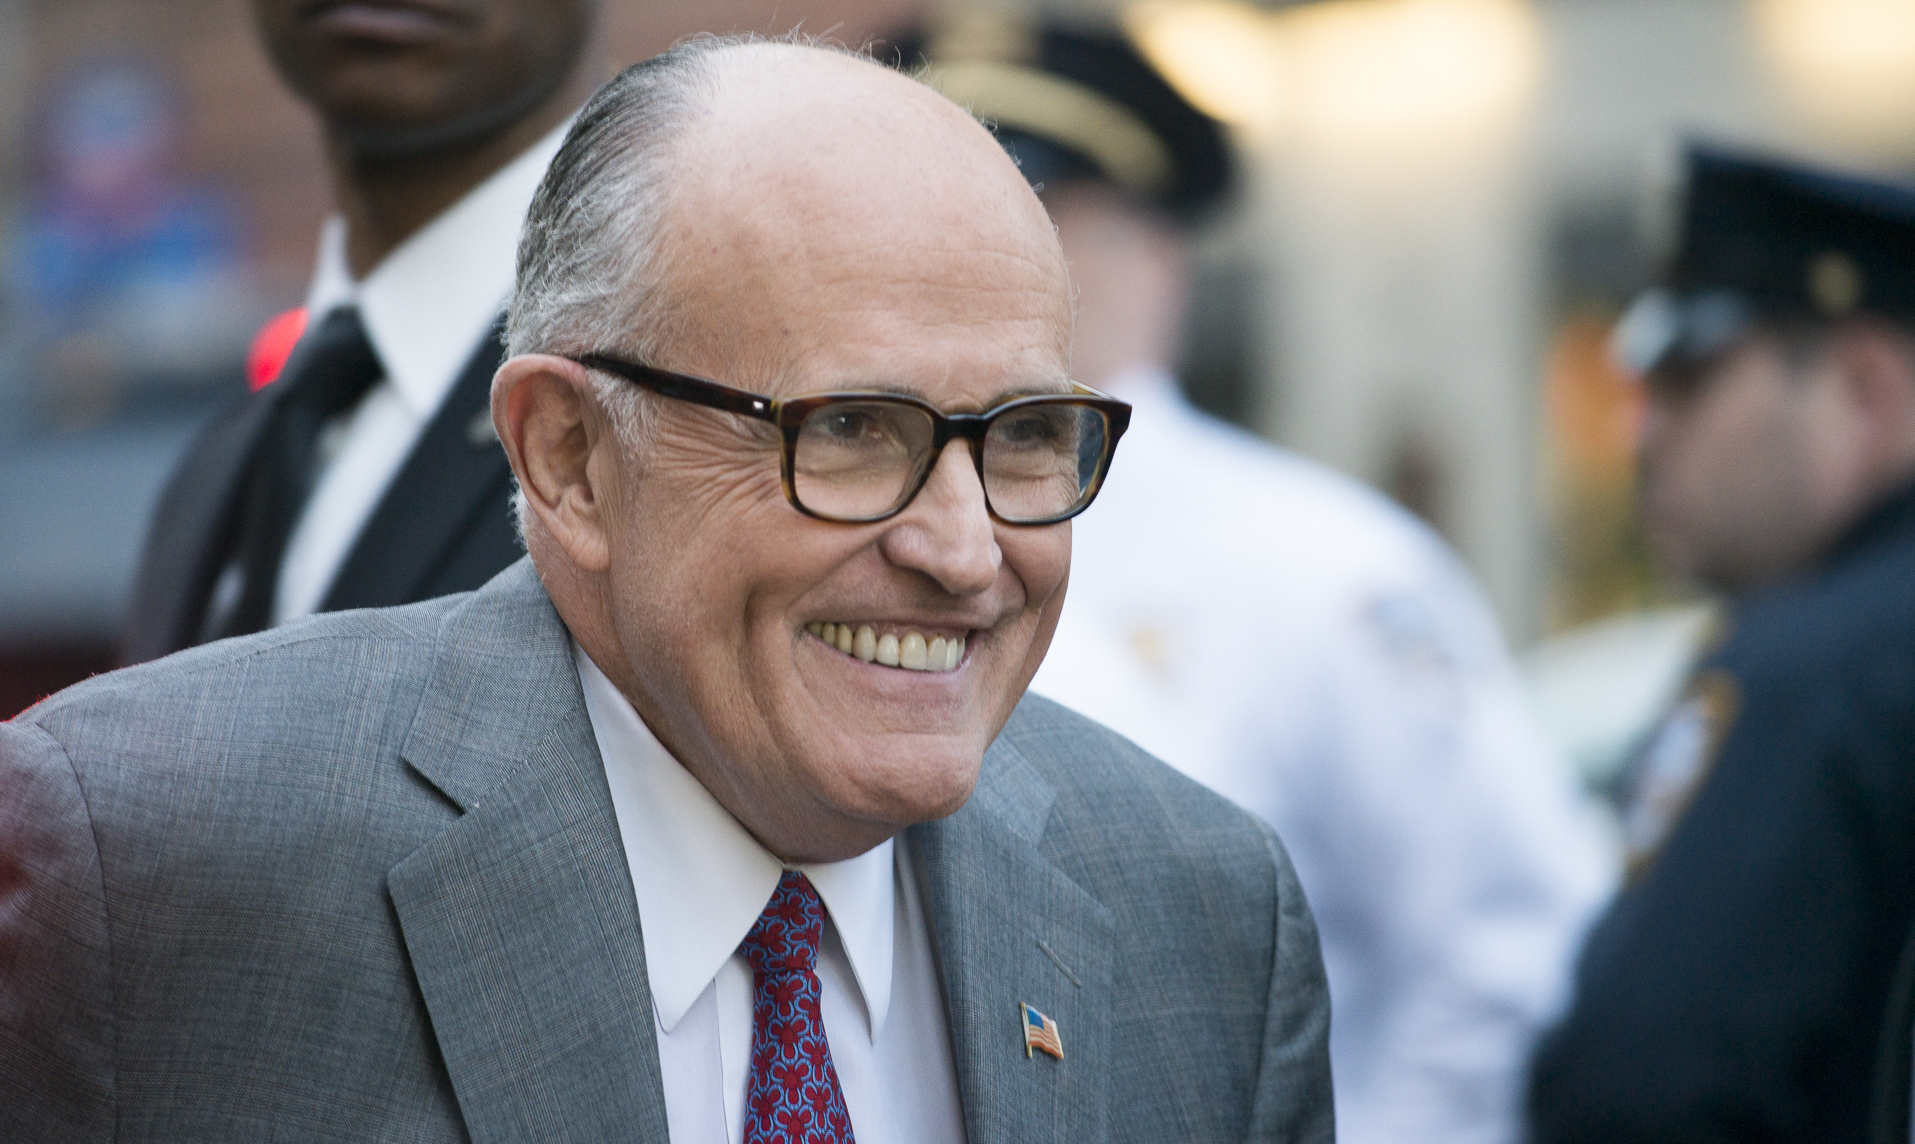 04/15/2015 - Rudy Giuliani - 2015 Tribeca Film Festival Opening Night: Live From New York! - Outside Arrivals - Beacon Theater - New York City, NY, USA - Keywords: Beacon Theater, New York City, SNL, Saturday Night Live, Tribeca Film Festival, Arrivals Orientation: Portrait Face Count: 1 - False - Photo Credit: PR Photos / PRPhotos.com - Contact (1-866-551-7827) - Portrait Face Count: 1